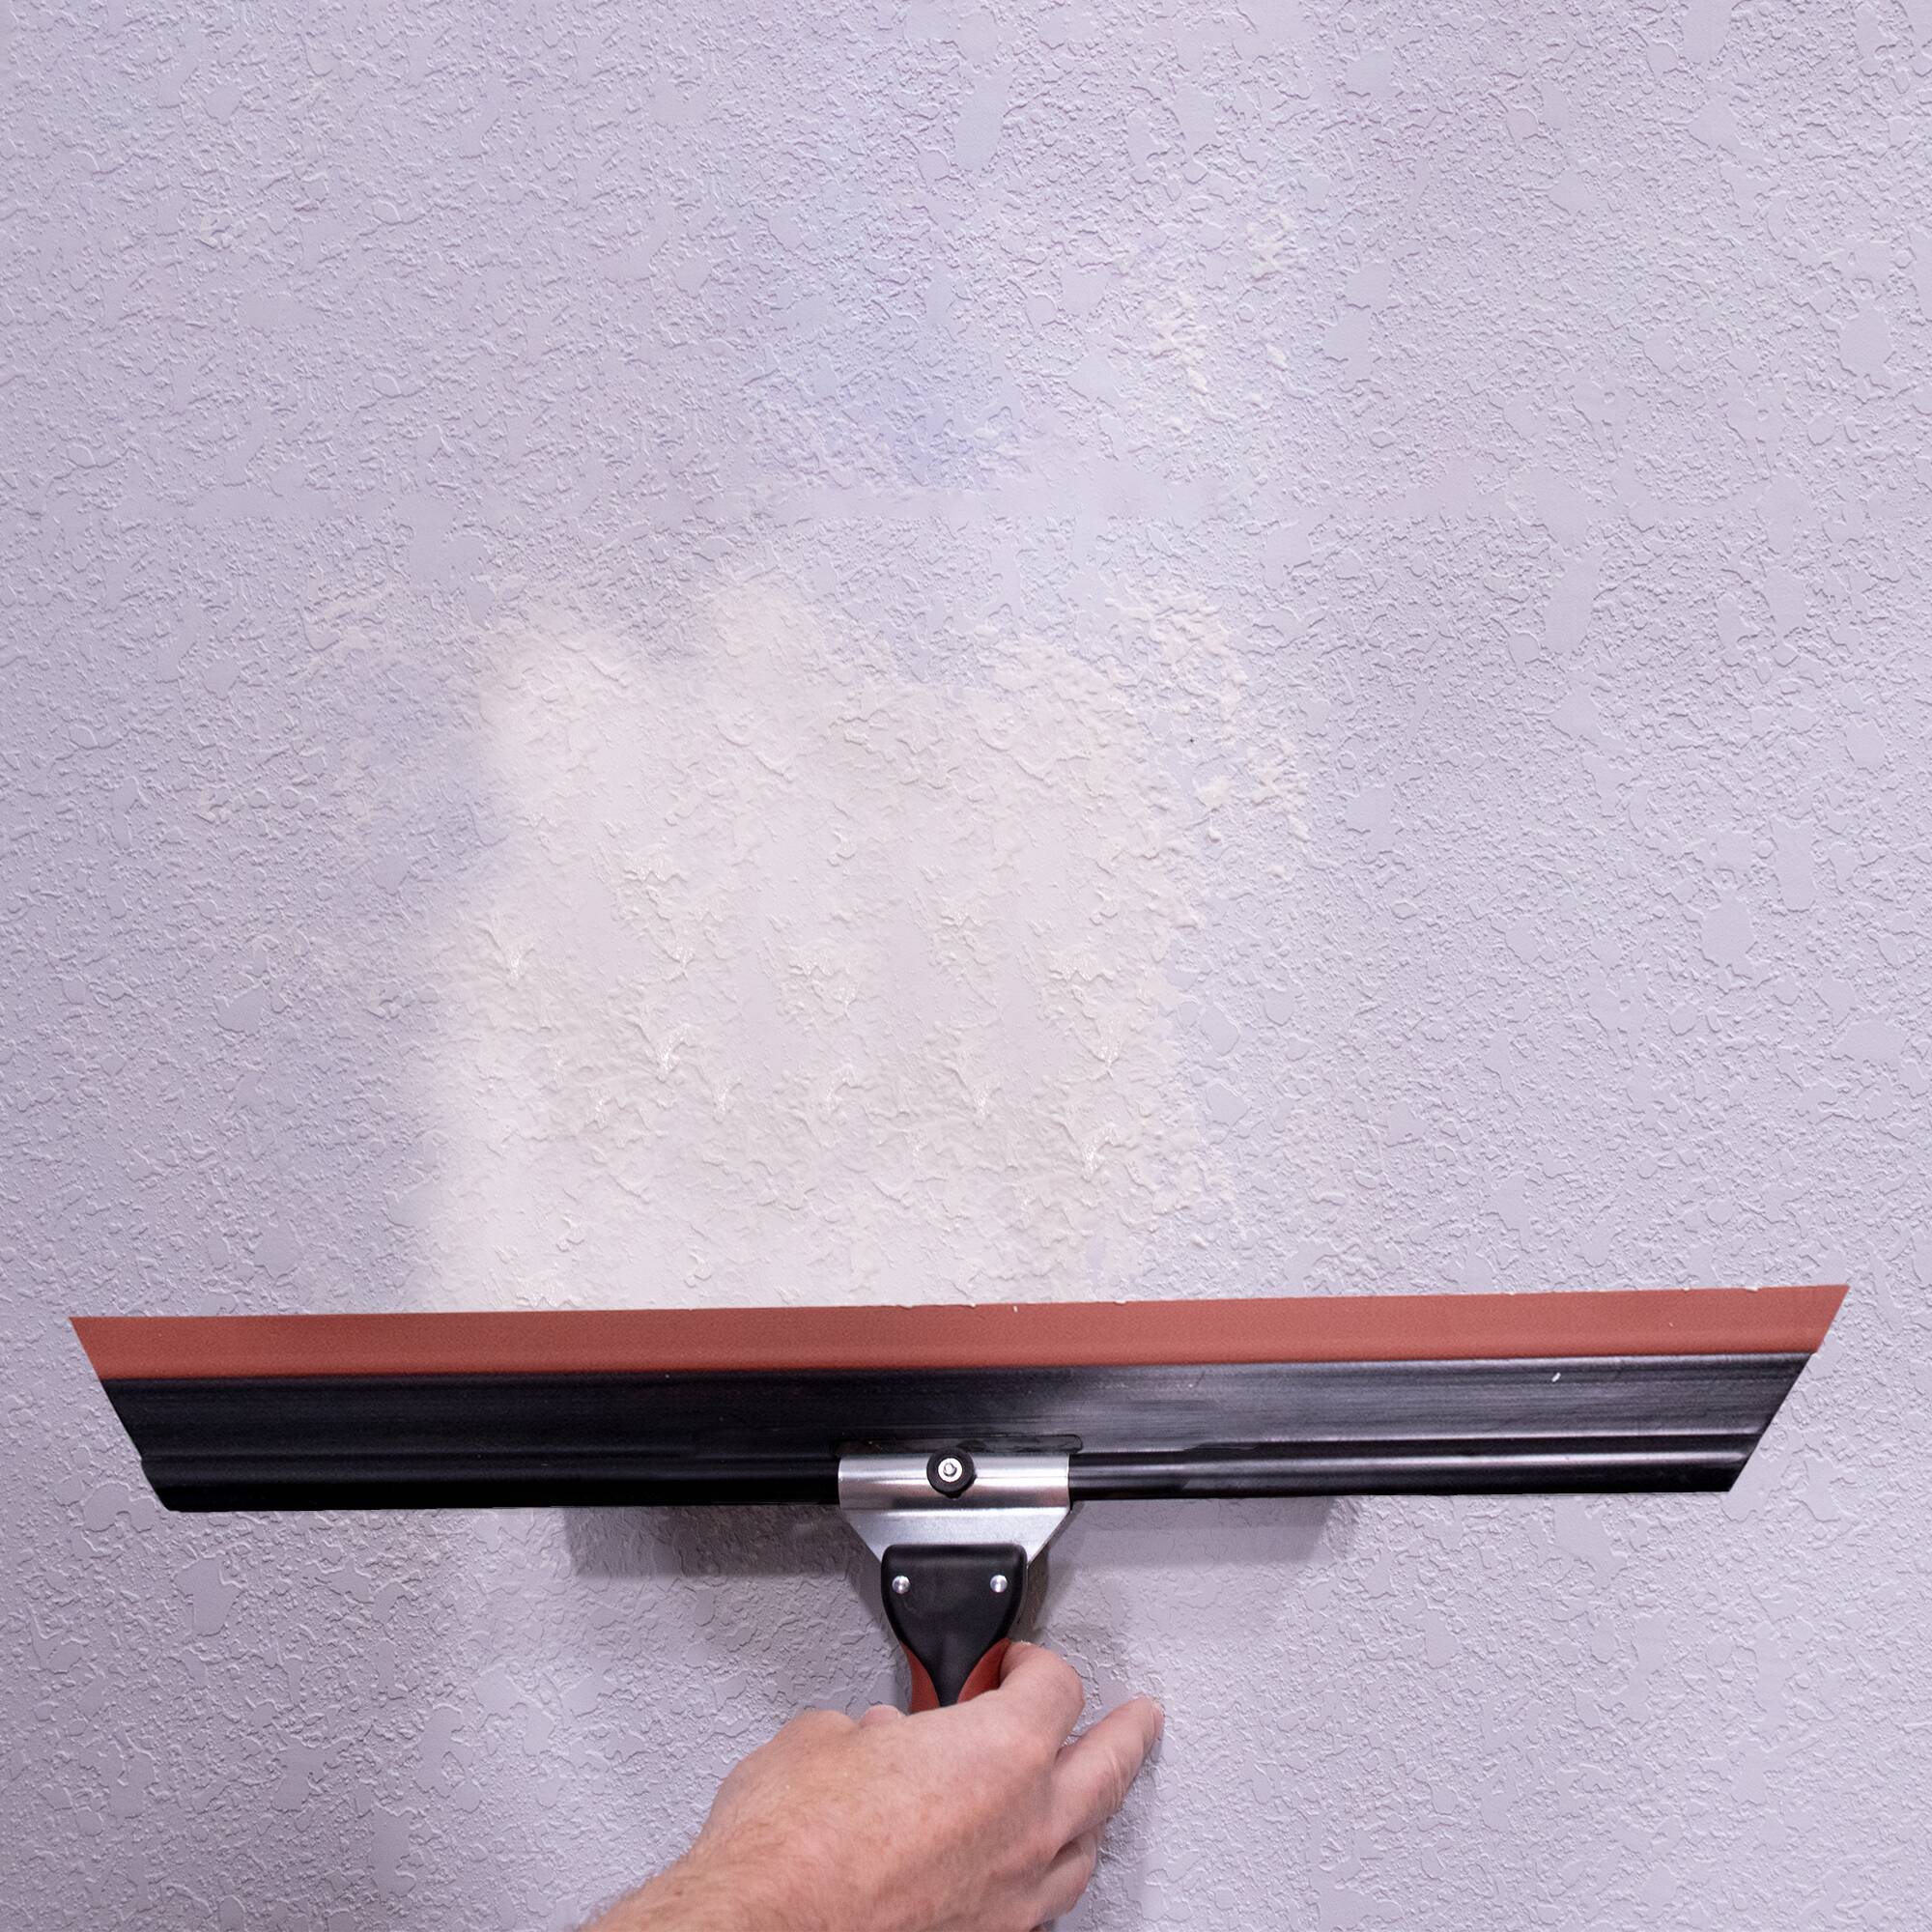 Master the Art of Plastering with the Magic Trowel: Tips and Tricks for Success